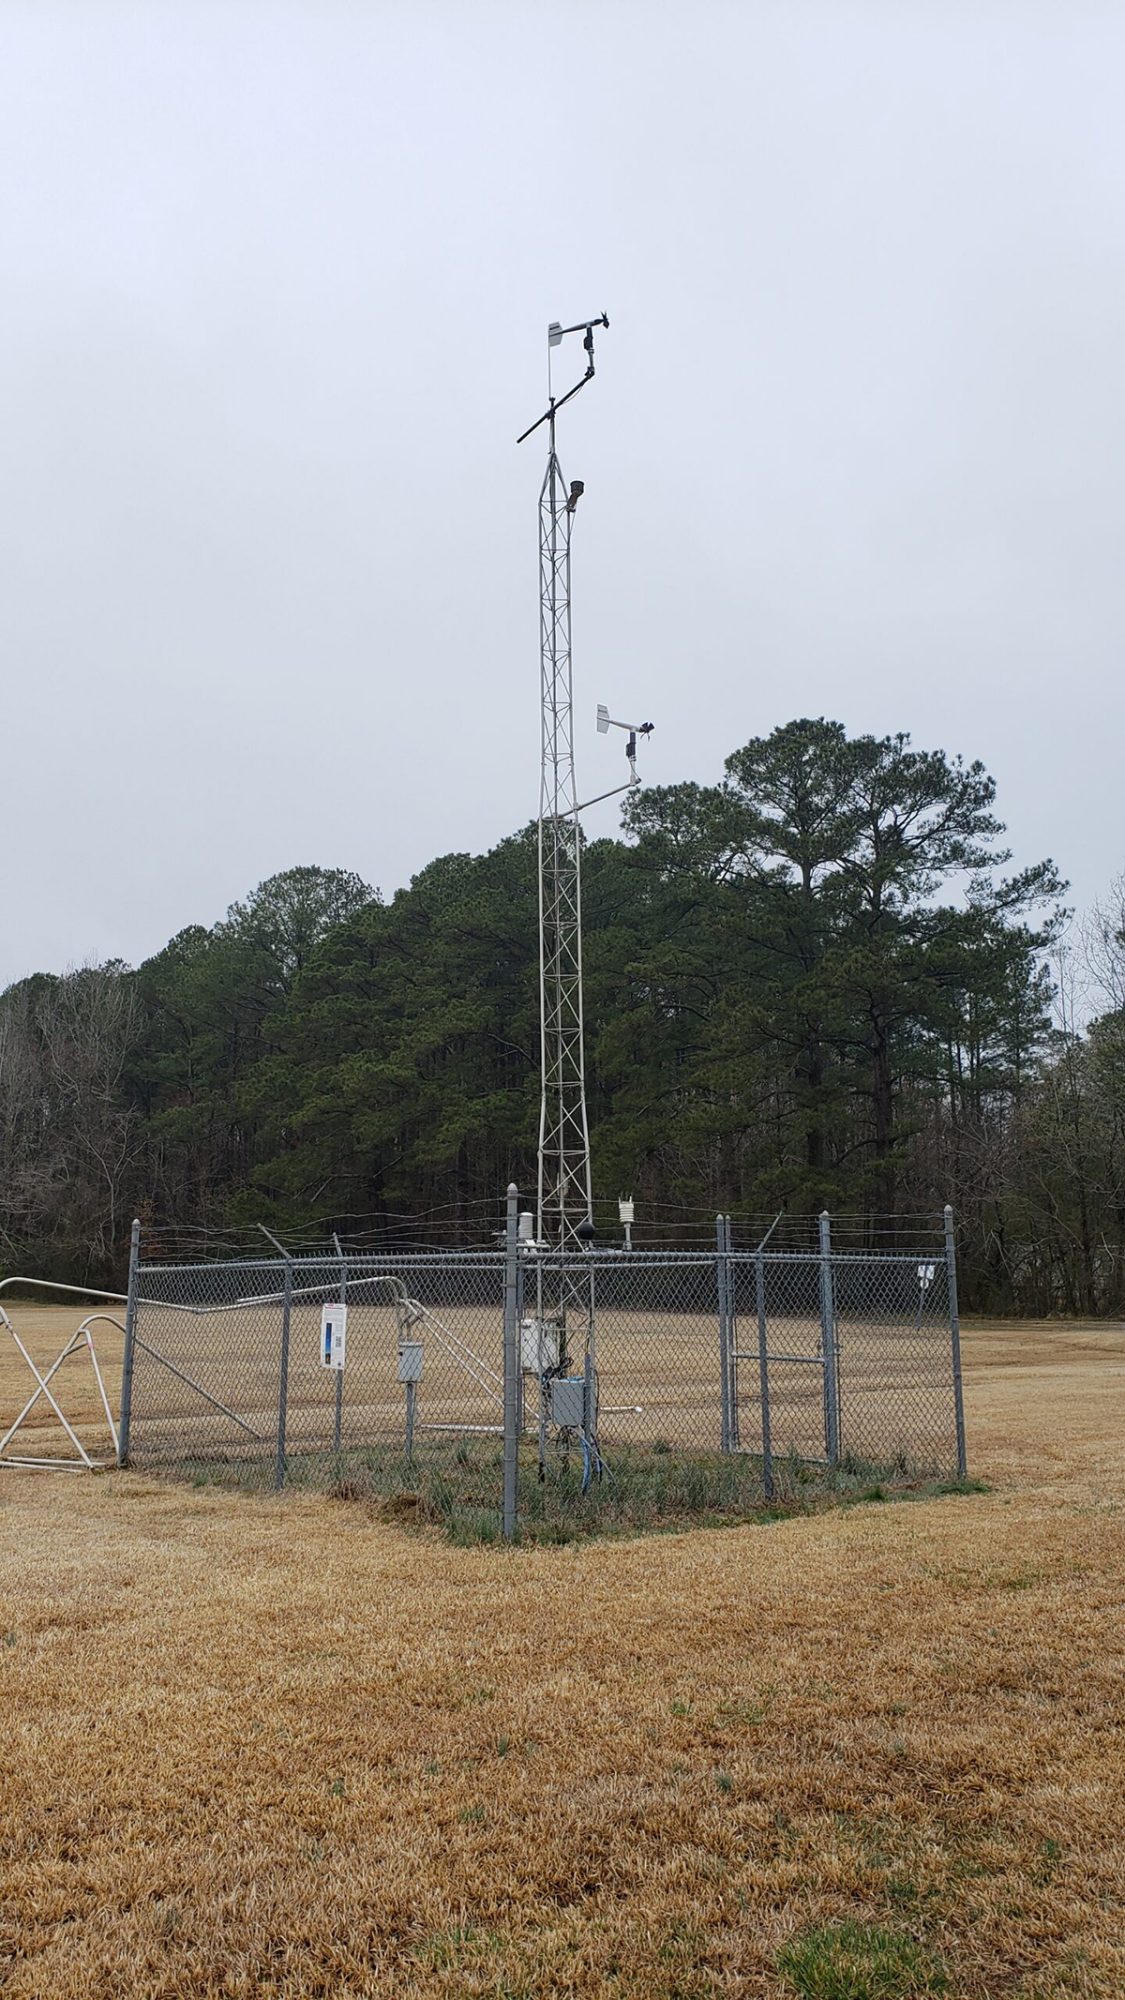 ECOnet station at Buckland Elementary School in Gates. Photo: State Climate Office of North Carolina